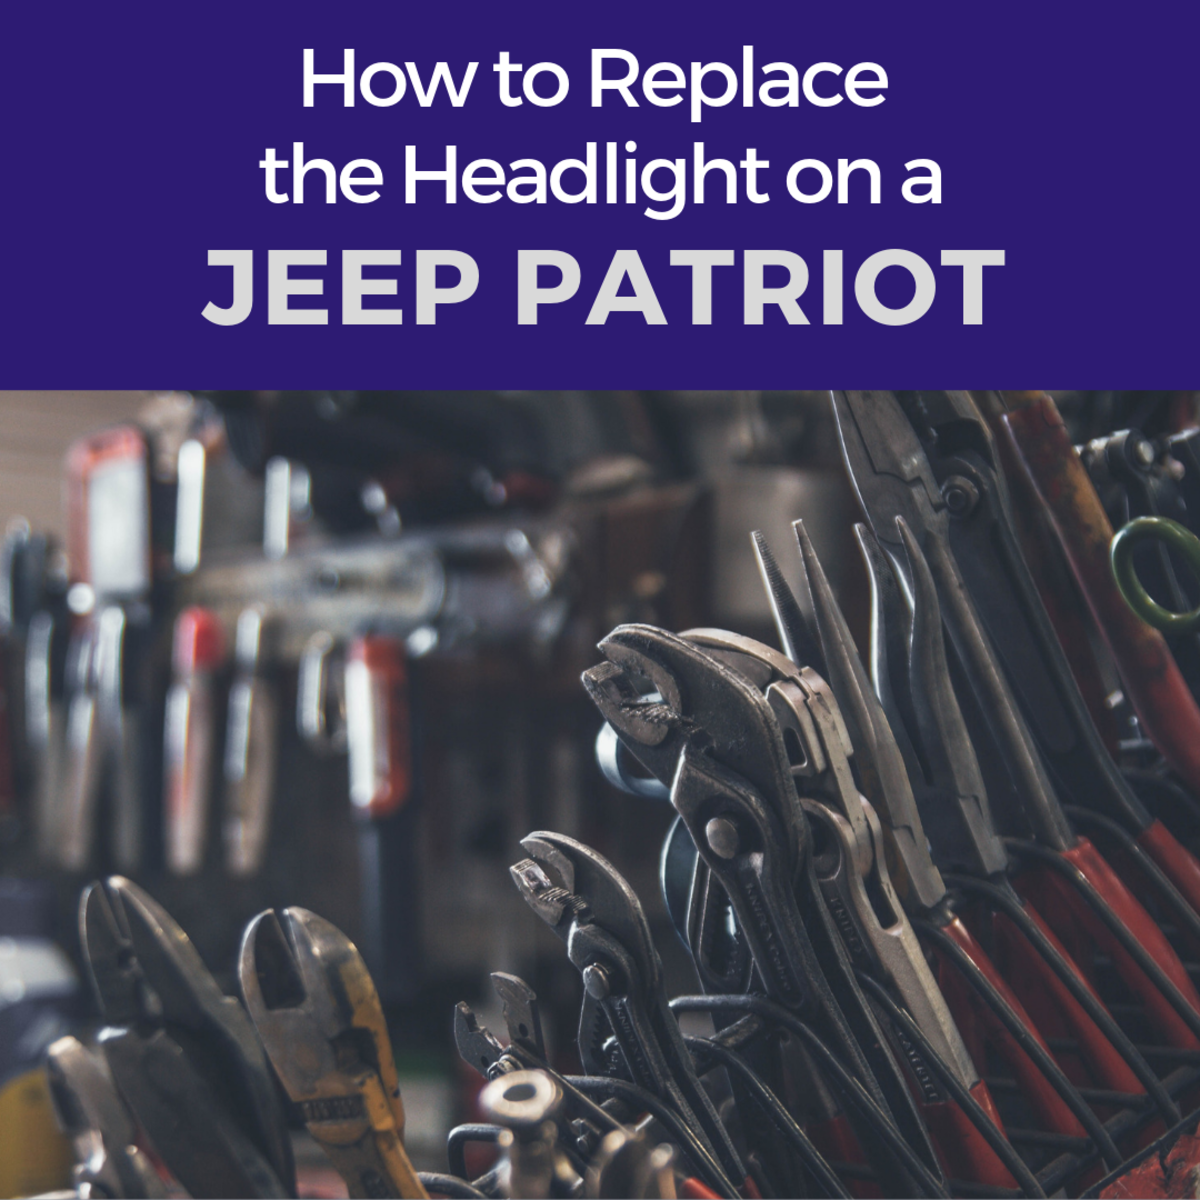 How to Replace a Headlight on a Jeep Patriot